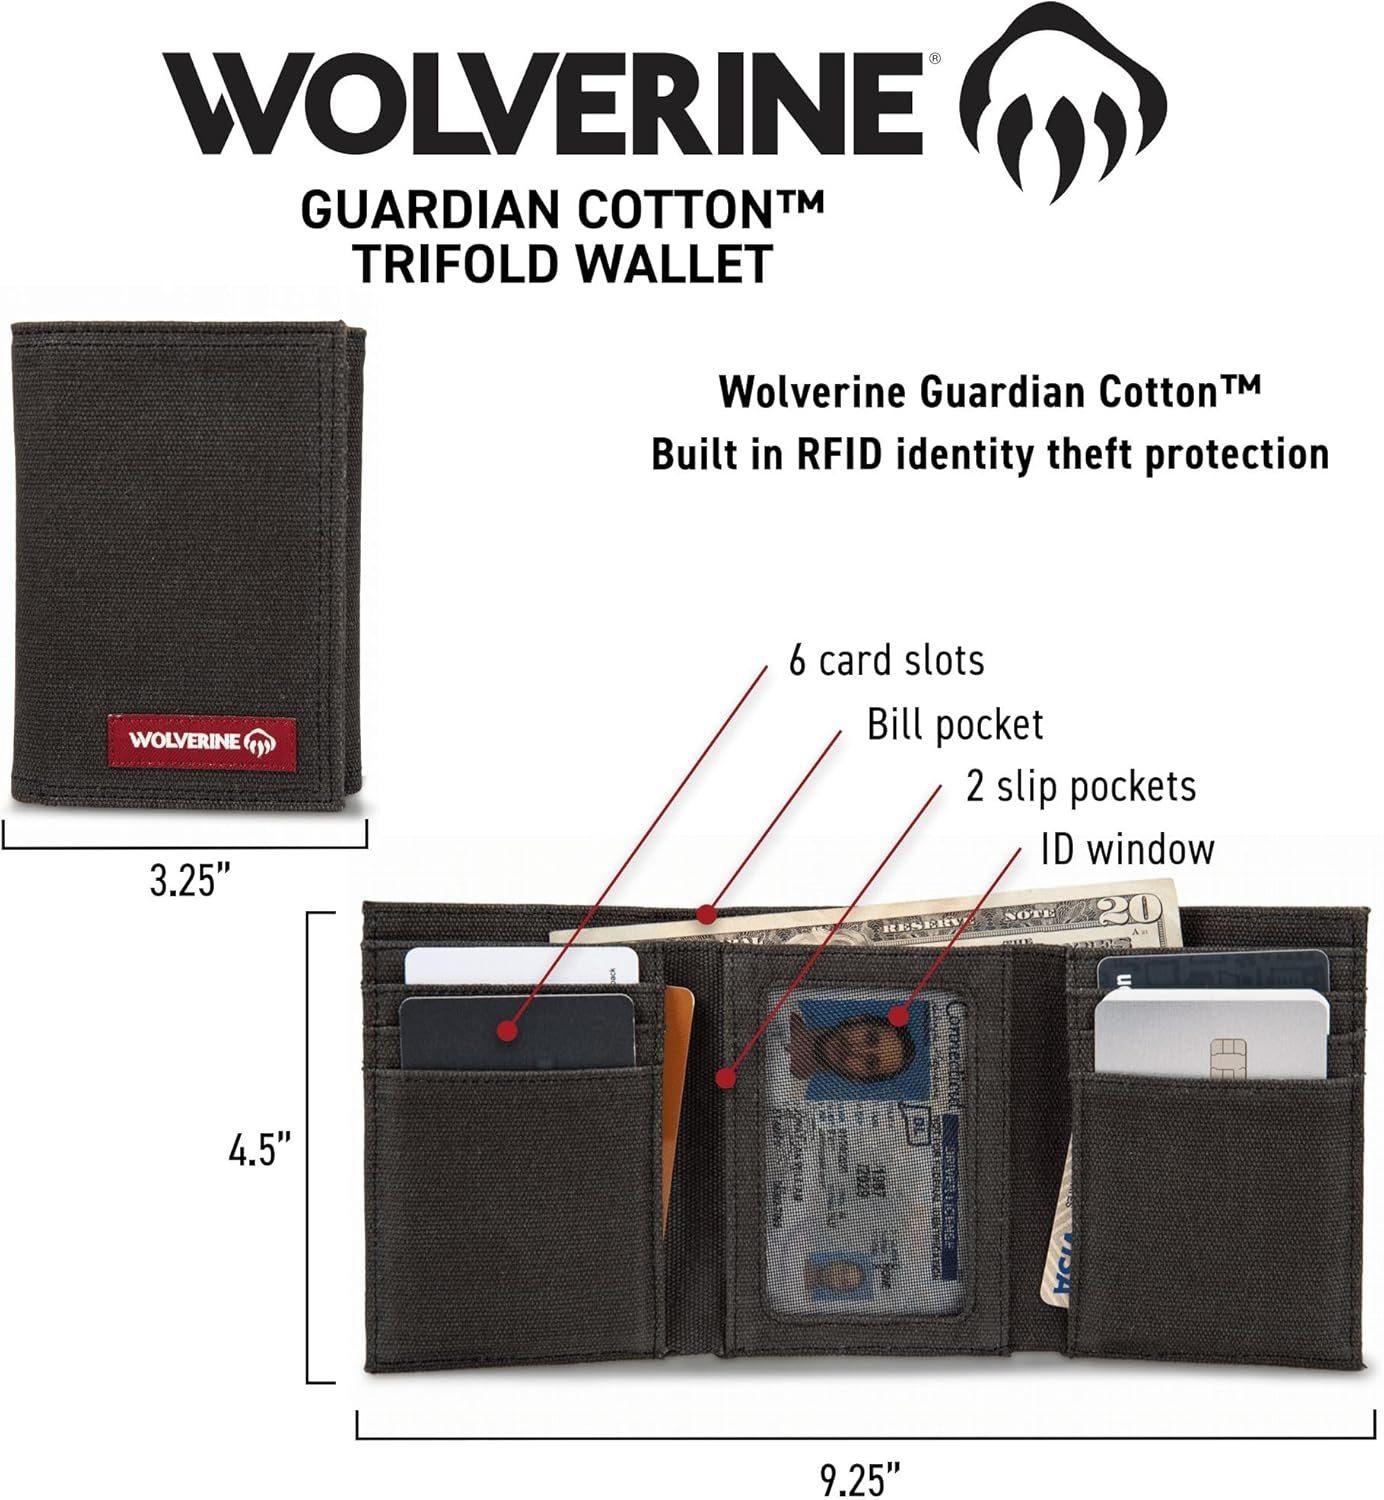 WOLVERINE Men’s Rugged Trifold Wallet Review